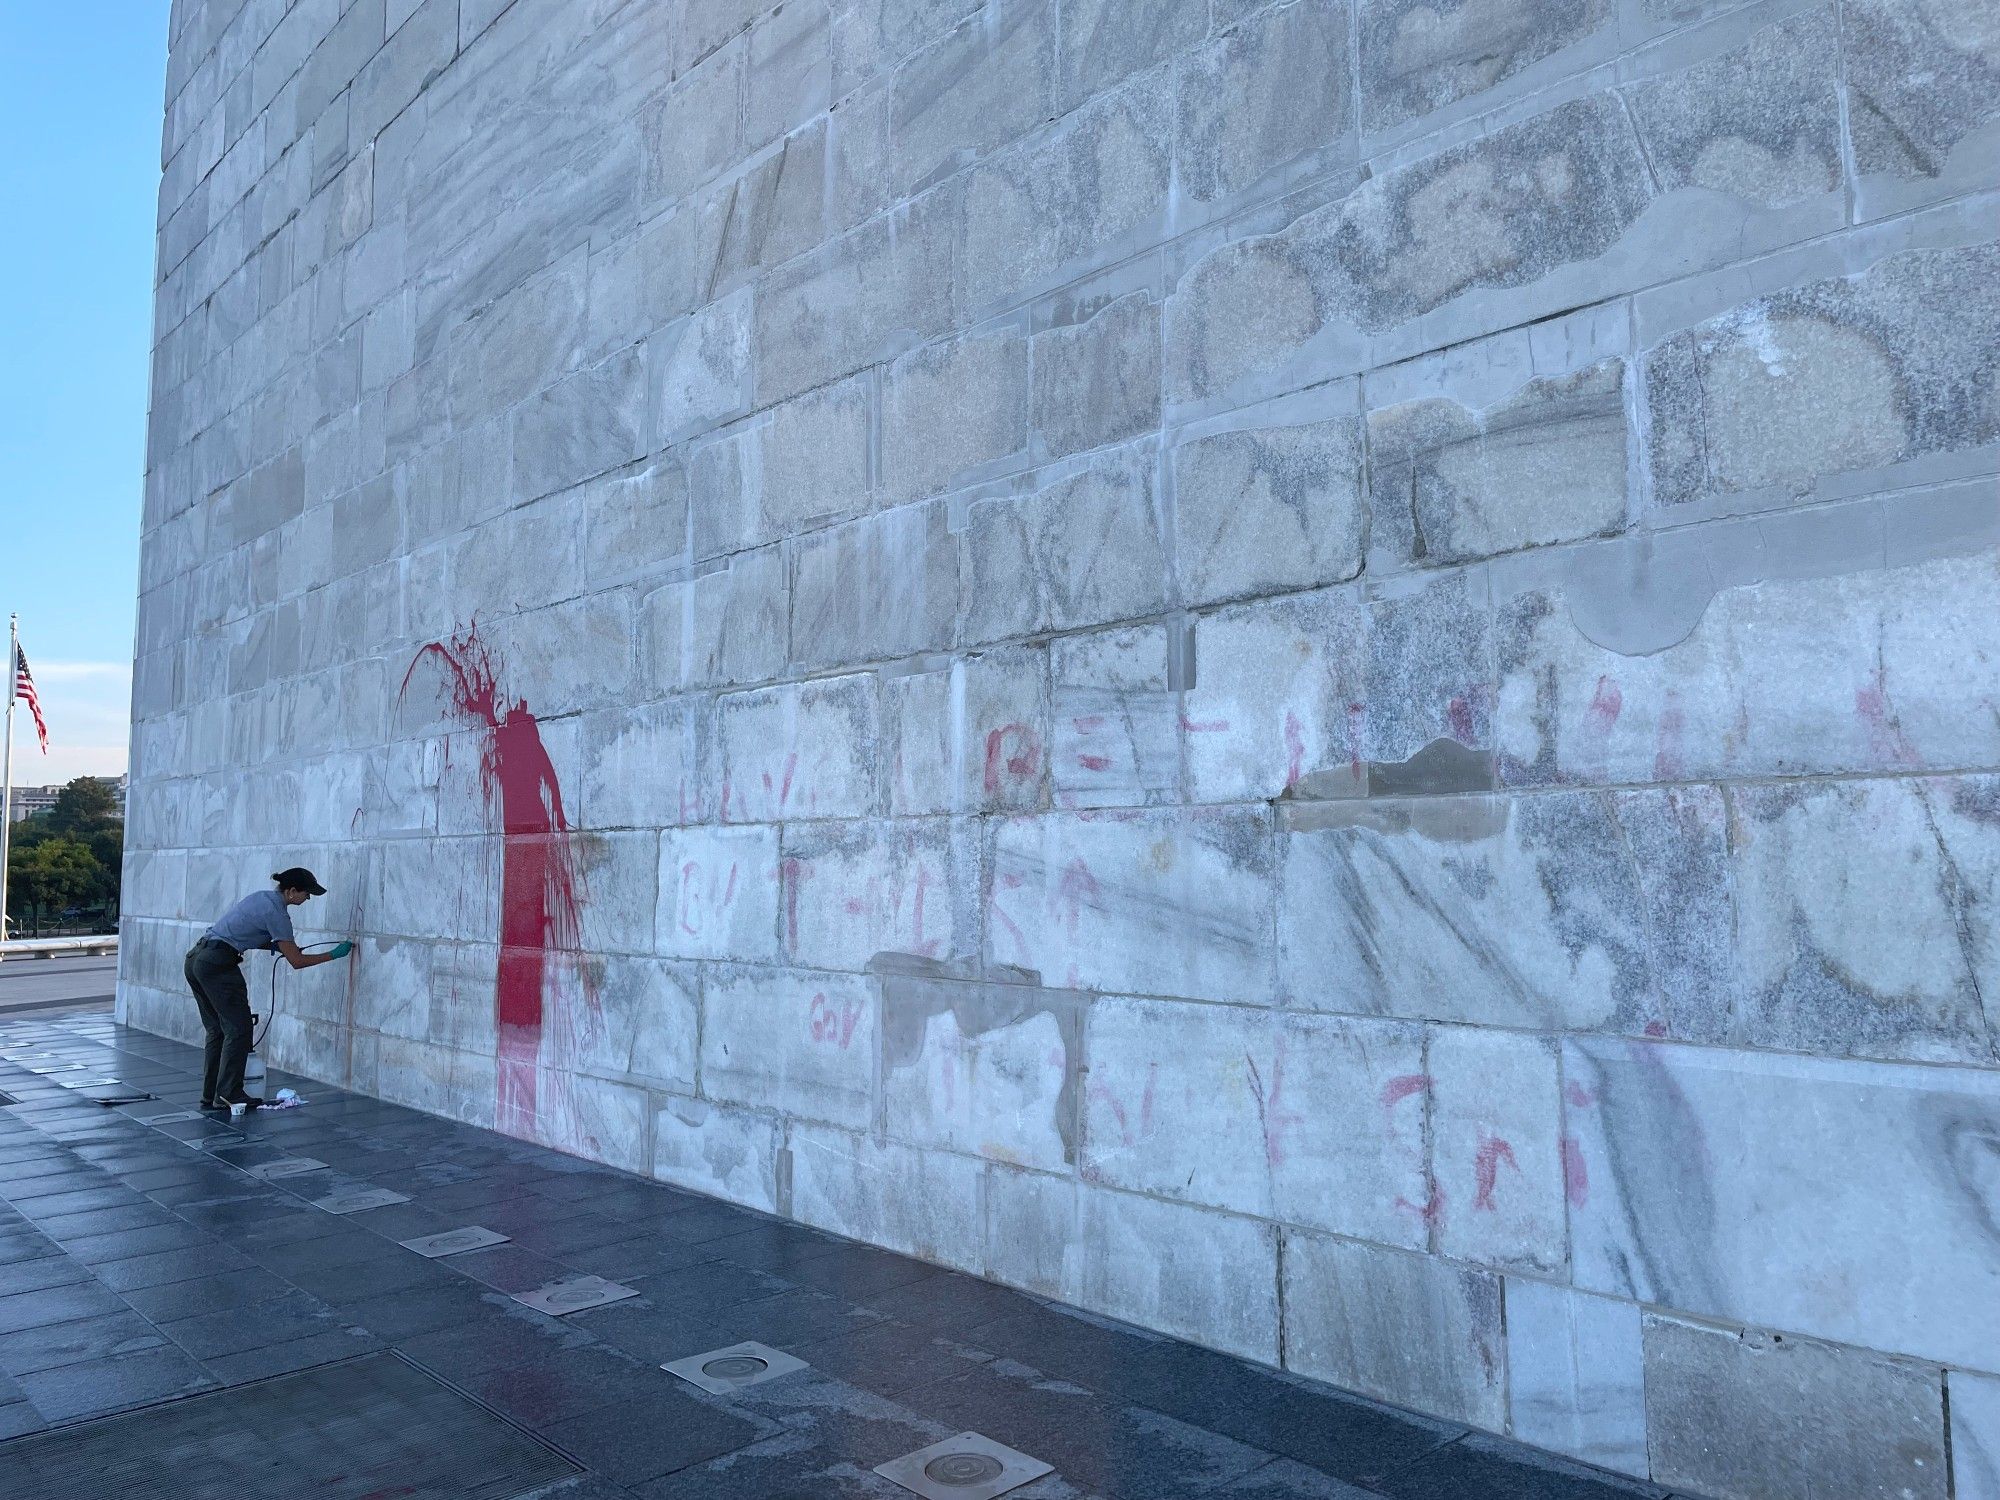 Washington Monument vandalized: All you need to know